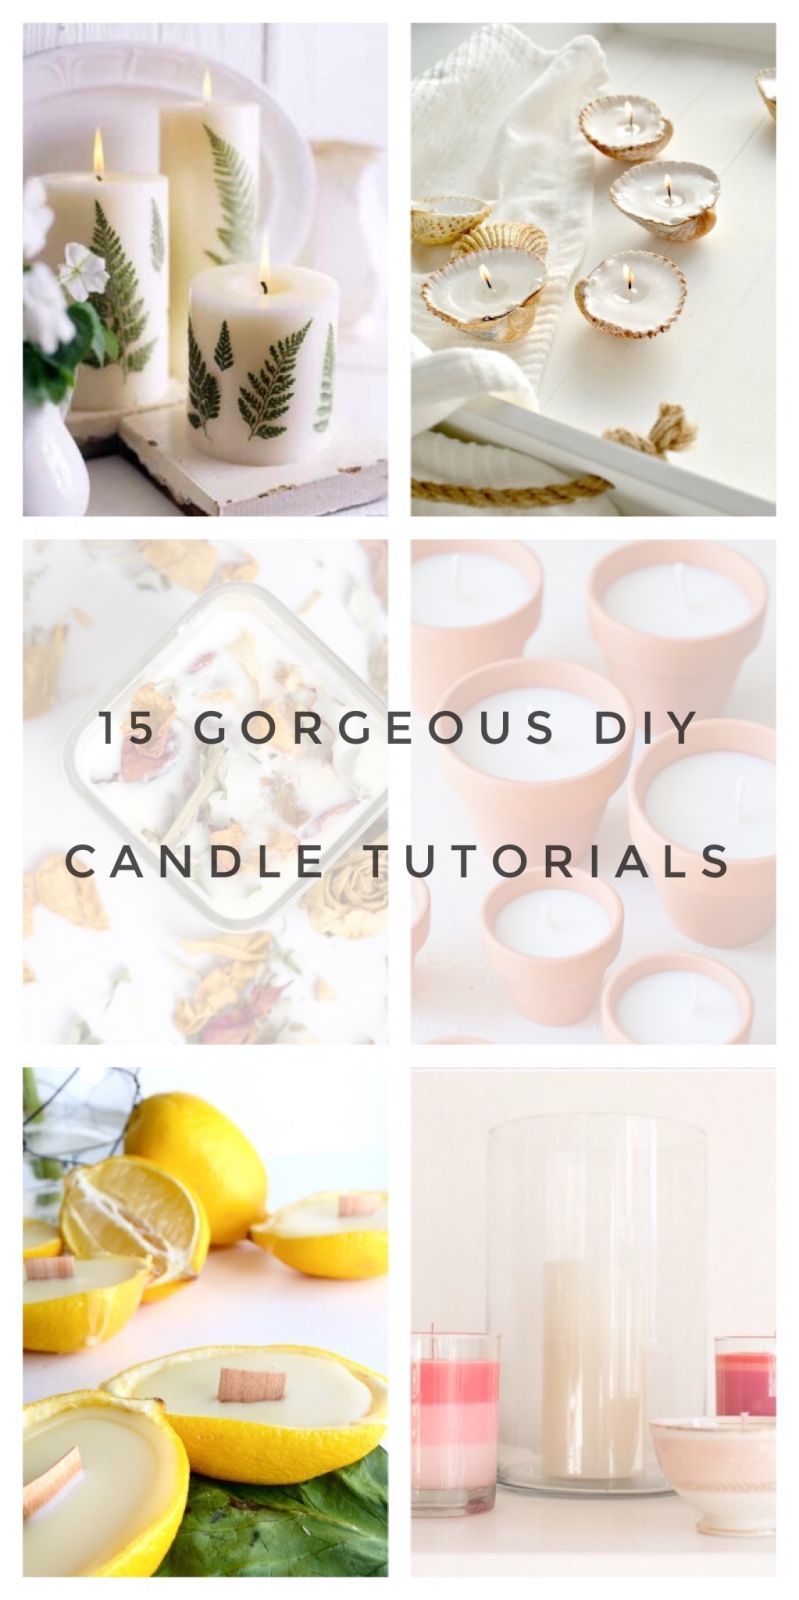 15 Gorgeous Candle DIYs That Are Totally Irresistible - 15 Gorgeous Candle DIYs That Are Totally Irresistible -   14 diy Candles containers ideas